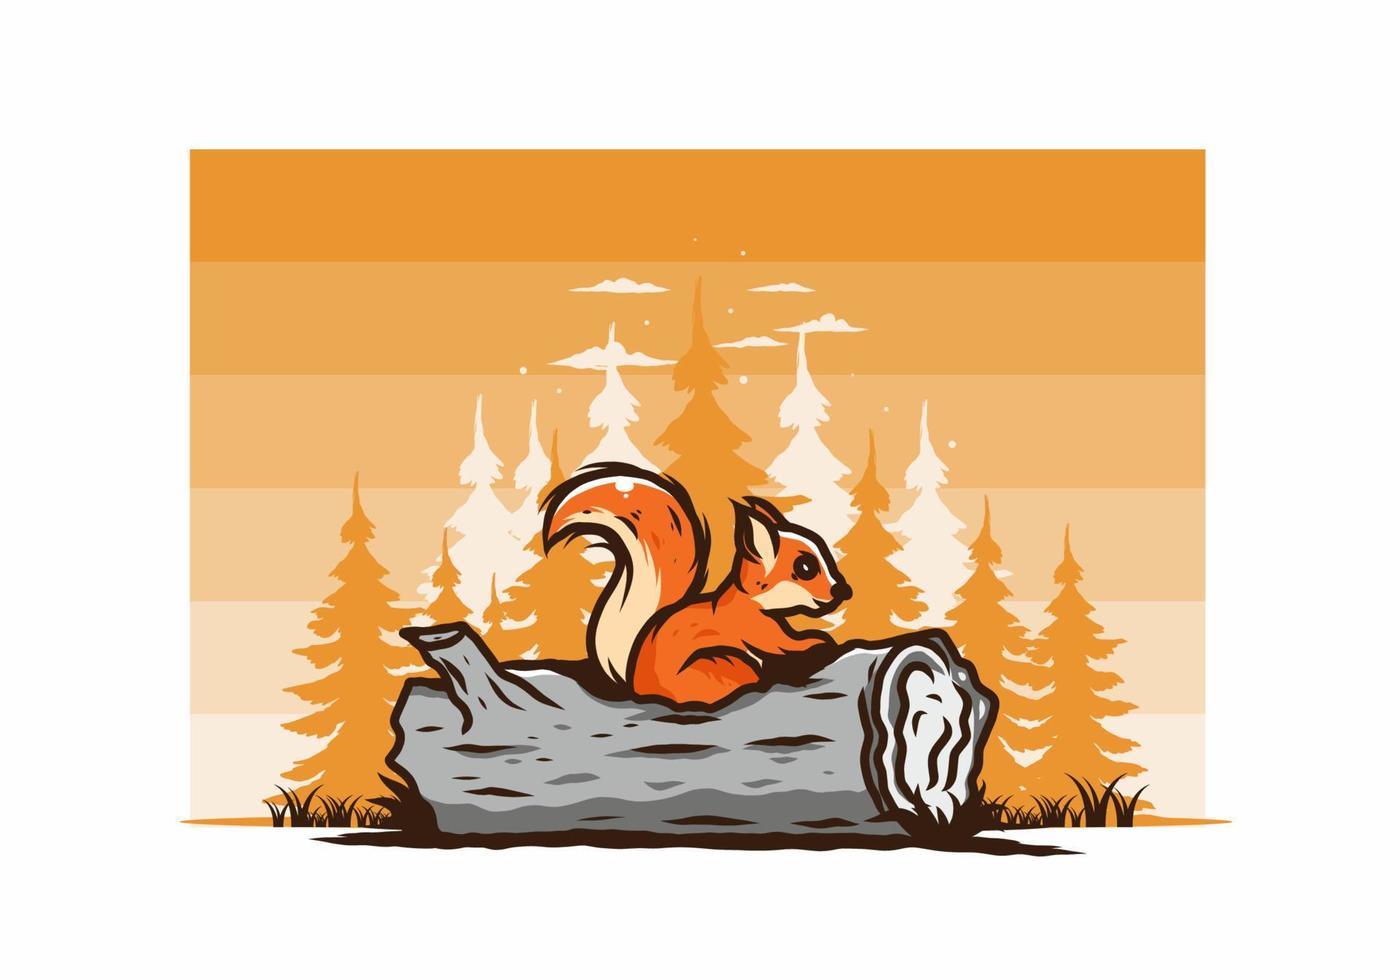 Lonely squirrel hiding in a dead tree trunk illustration vector